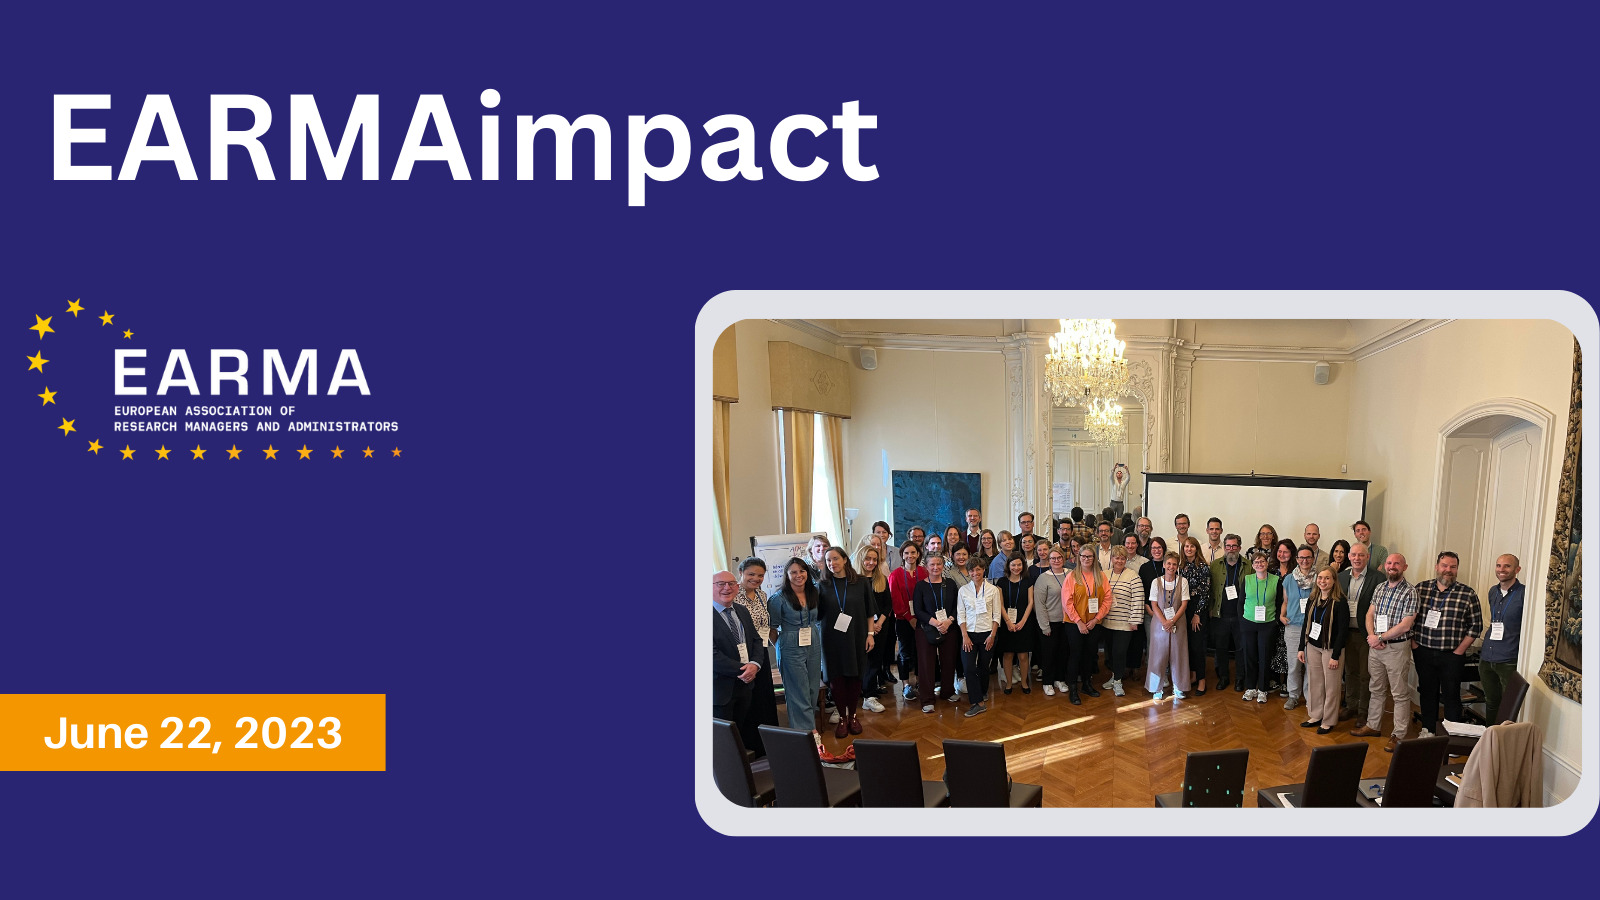 Impact training and culture – impact training program in the planning